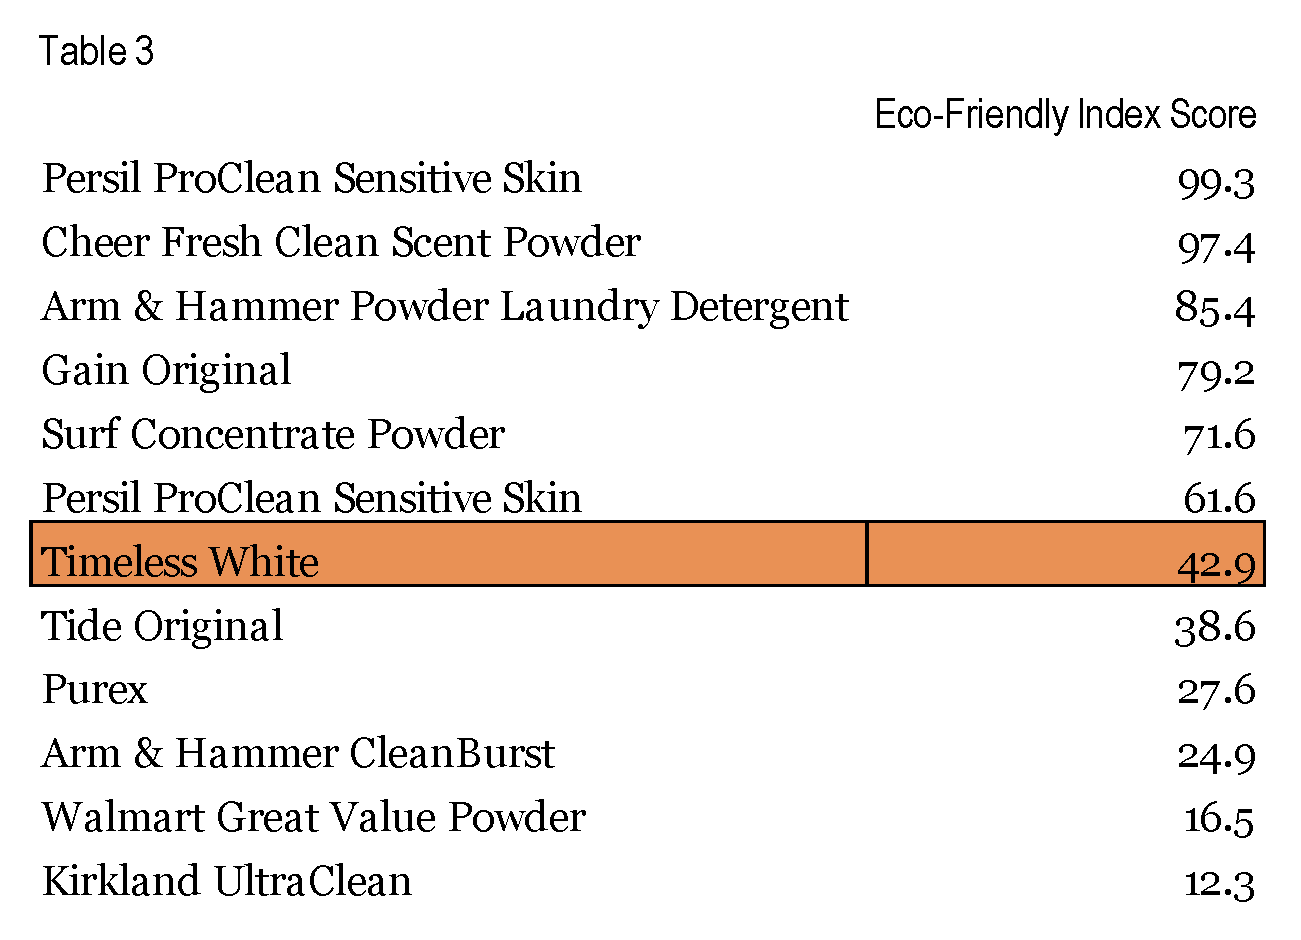 Examining Table 3, we see that Persil ProClean Sensitive Skin is the category standard bearer in the image of eco-friendly.